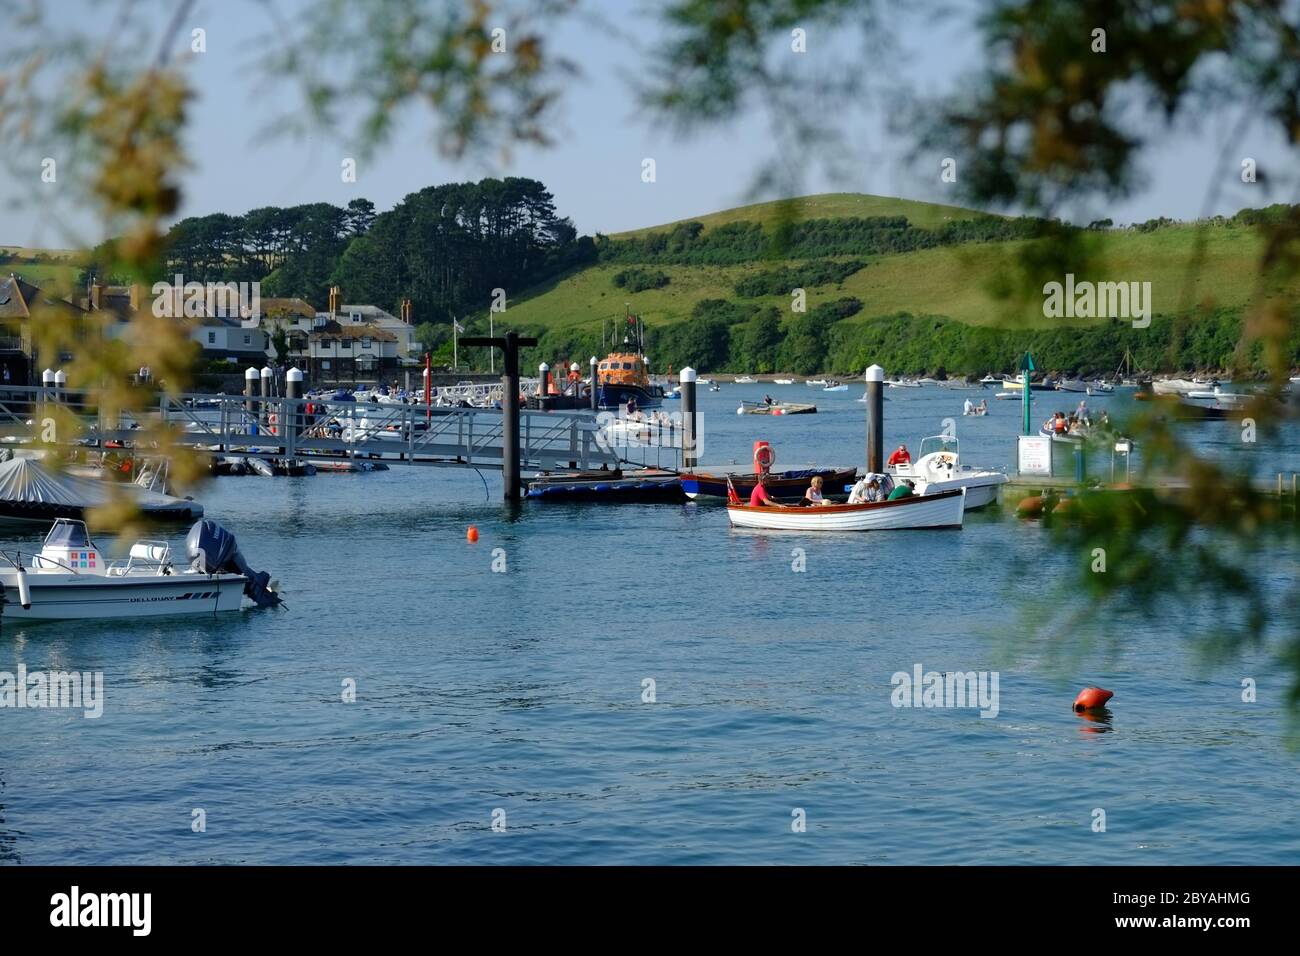 The Normandy Pontoon in Salcombe Harbour, Devon, England, United Kingdom on a summer's day. Stock Photo